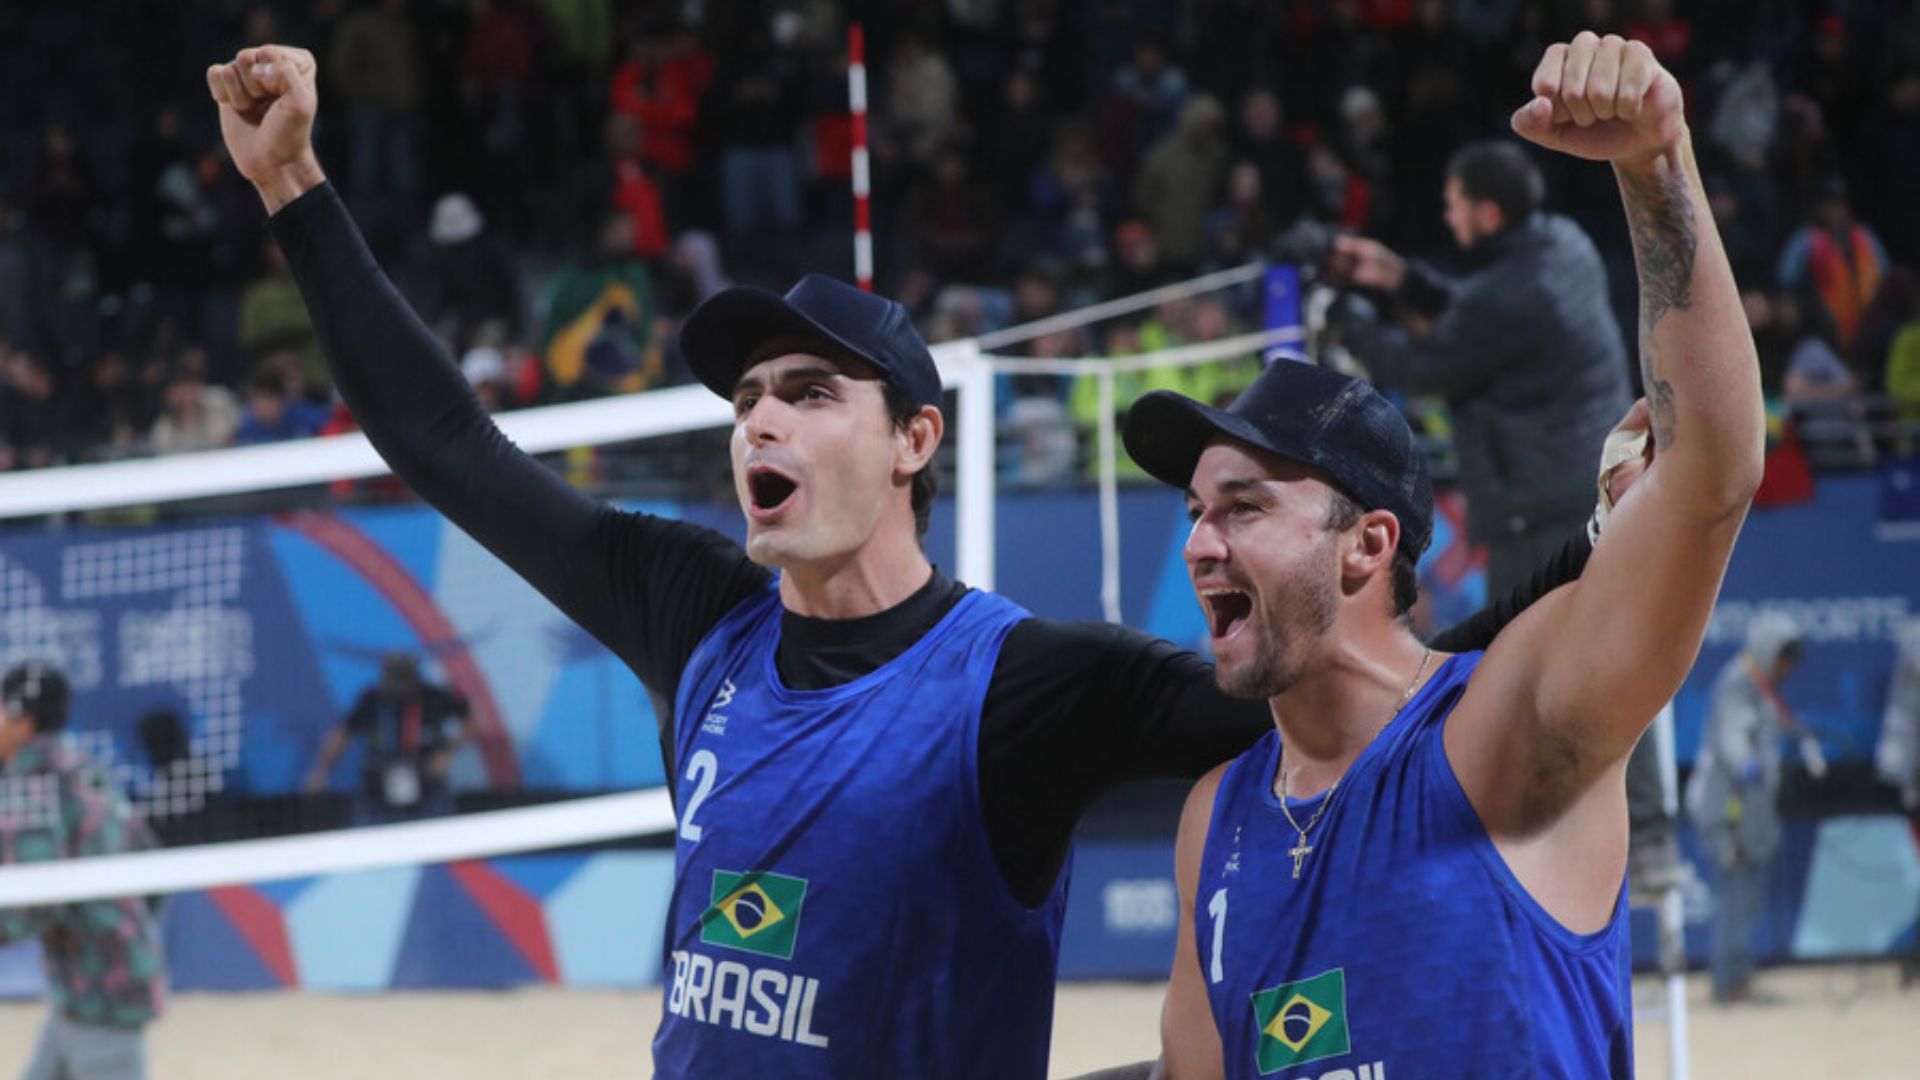 Summary: Brazil, the dominant force on the eighth day of competition